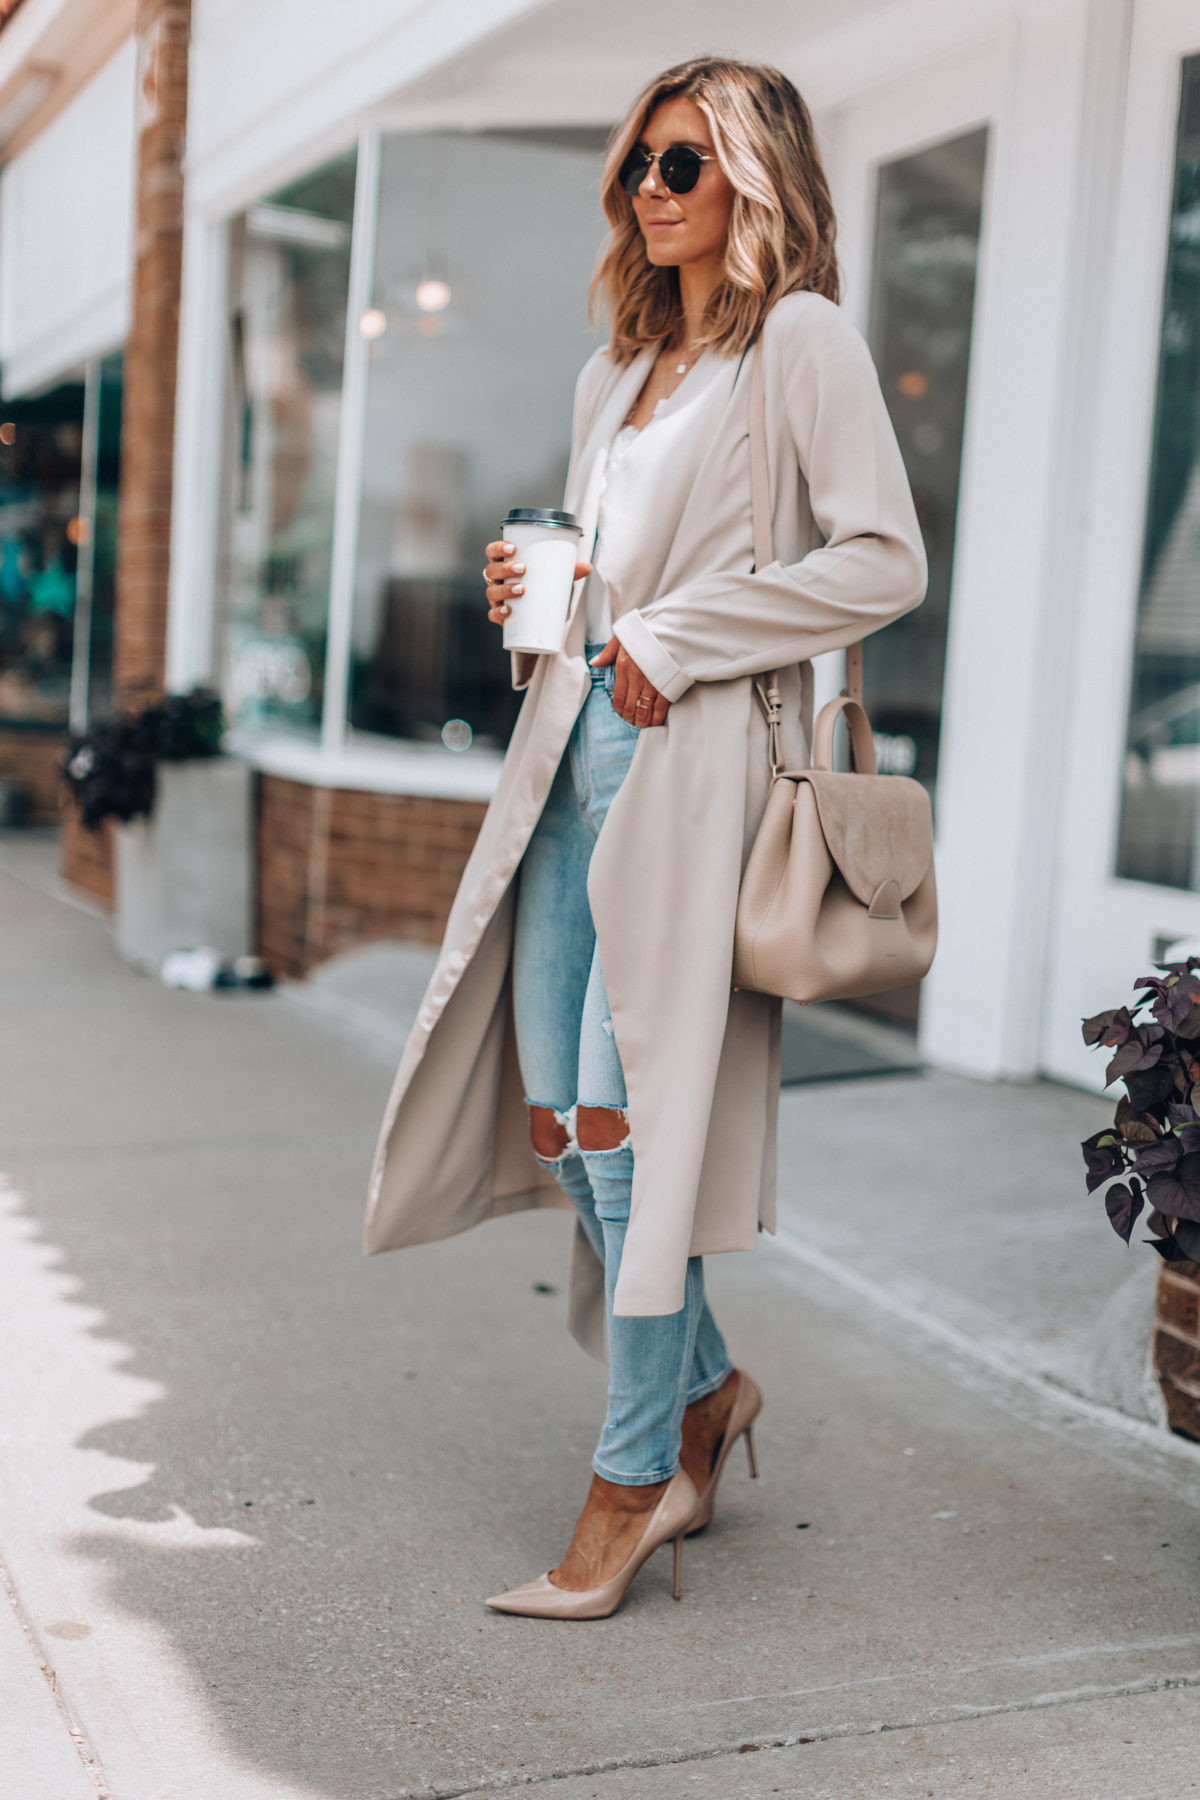 A Transitional Outfit for Summer to Fall | Cella Jane